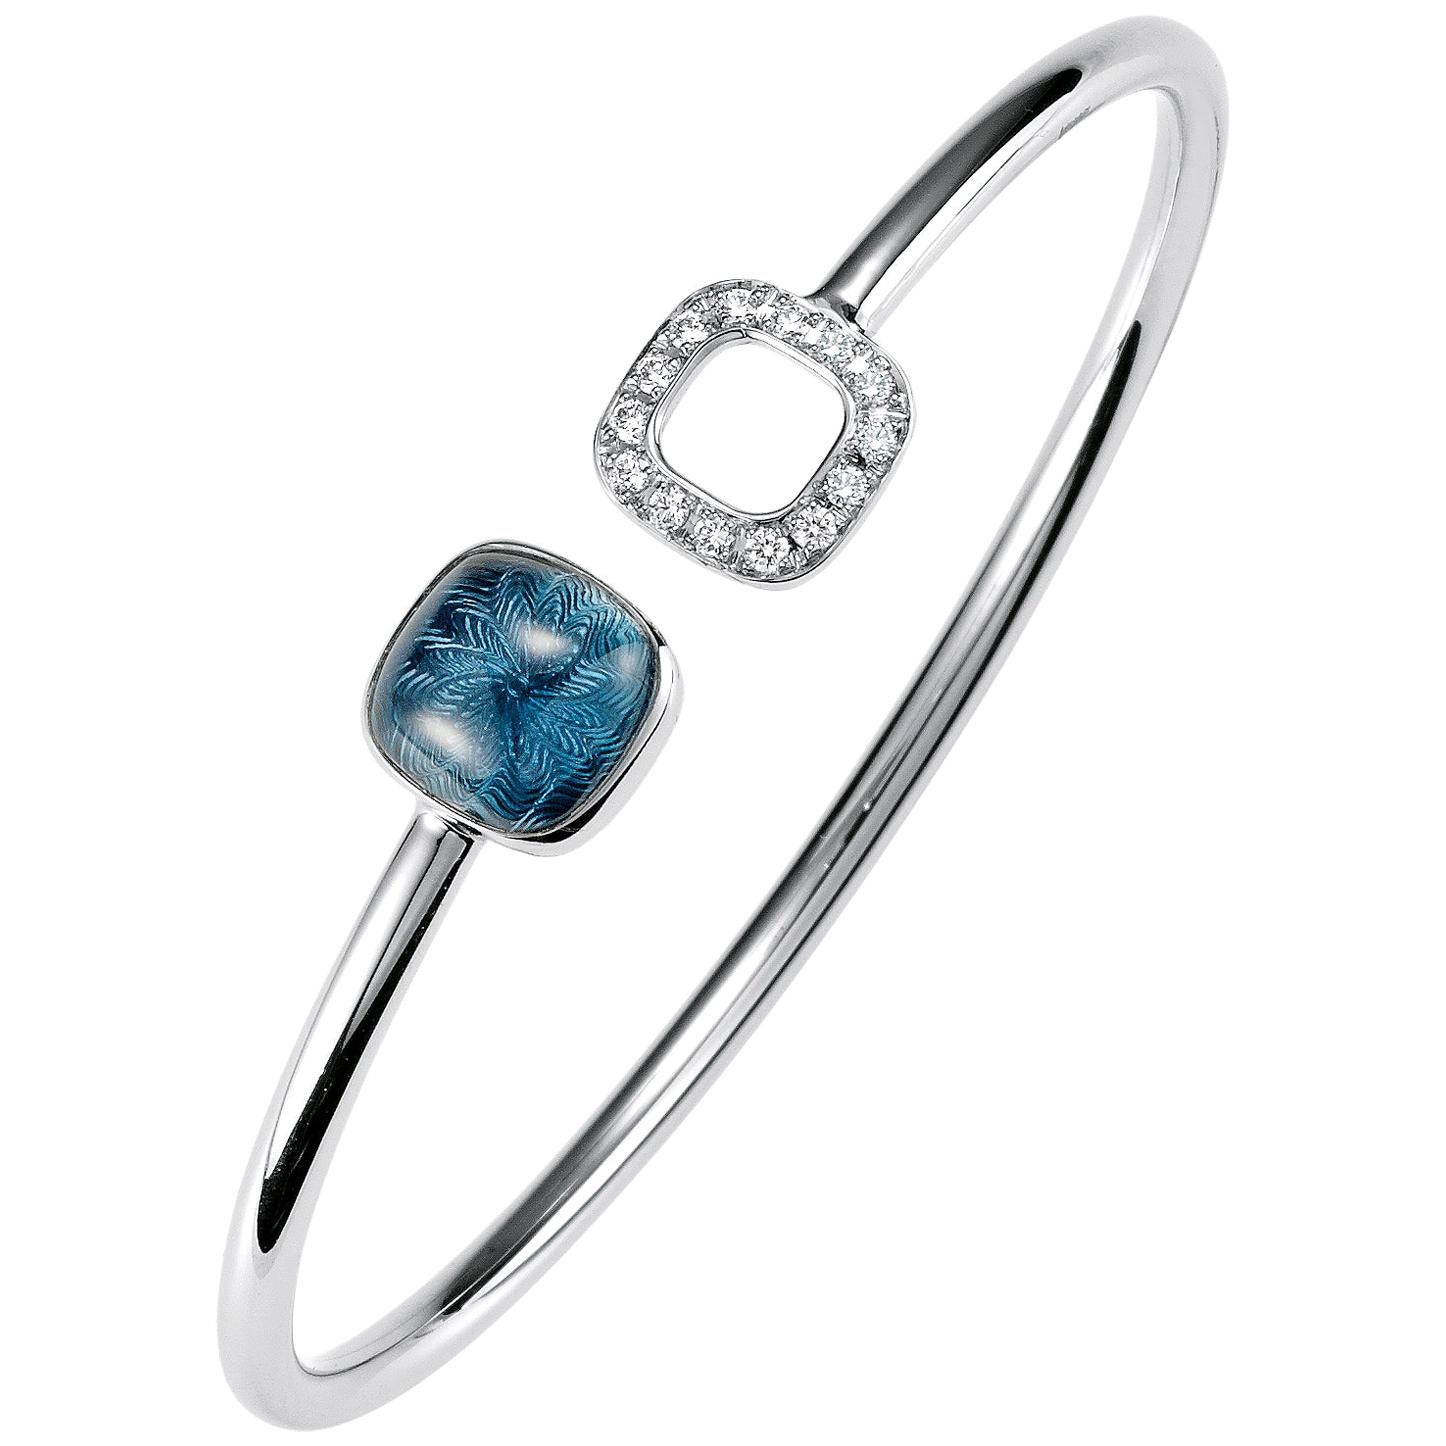 Victor Mayer Era Bracelet 18k White Gold With 14 Diamonds 0.28 ct And Blue Topaz For Sale